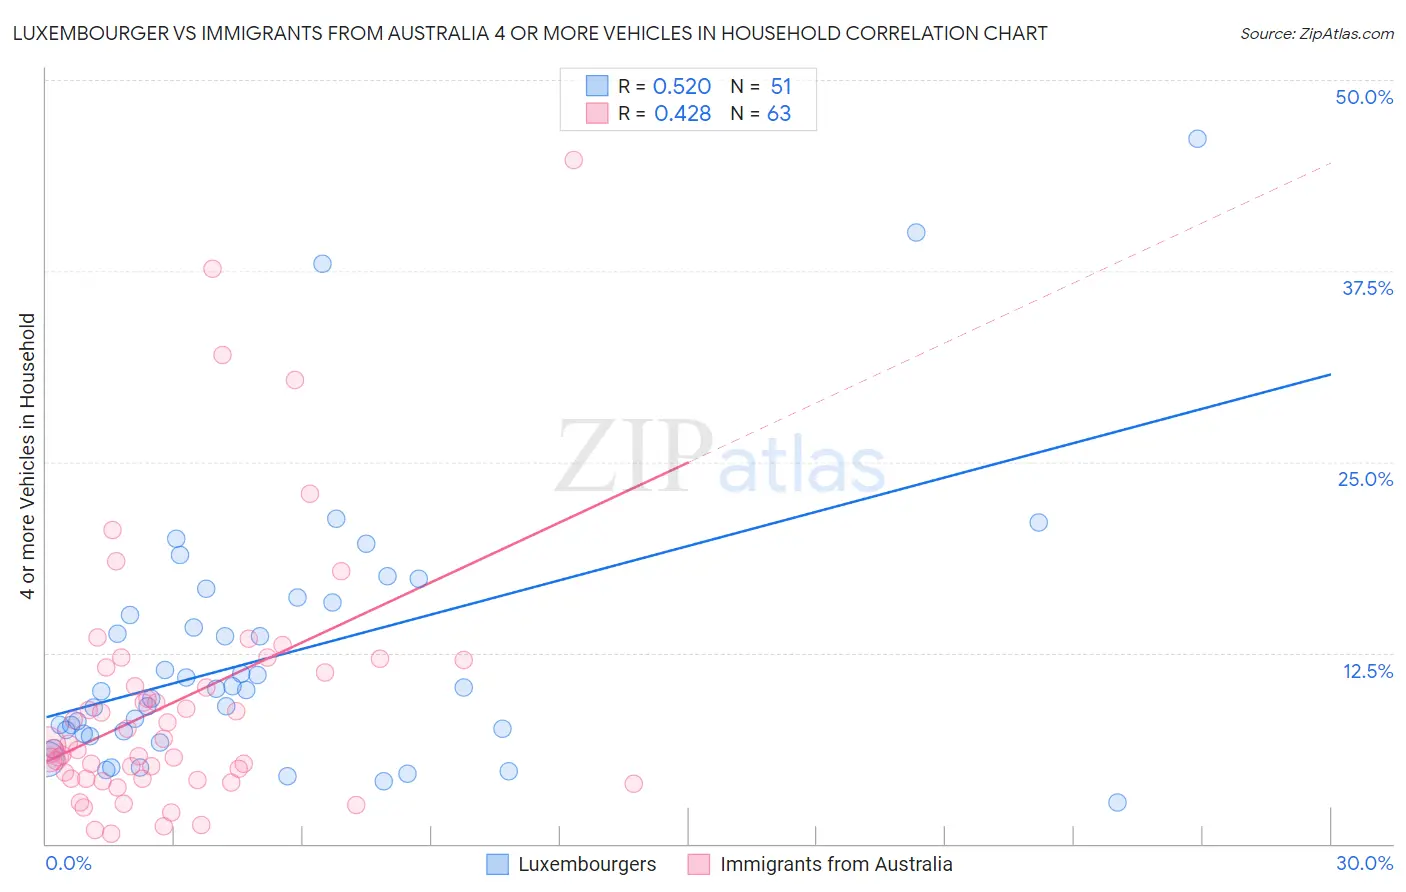 Luxembourger vs Immigrants from Australia 4 or more Vehicles in Household